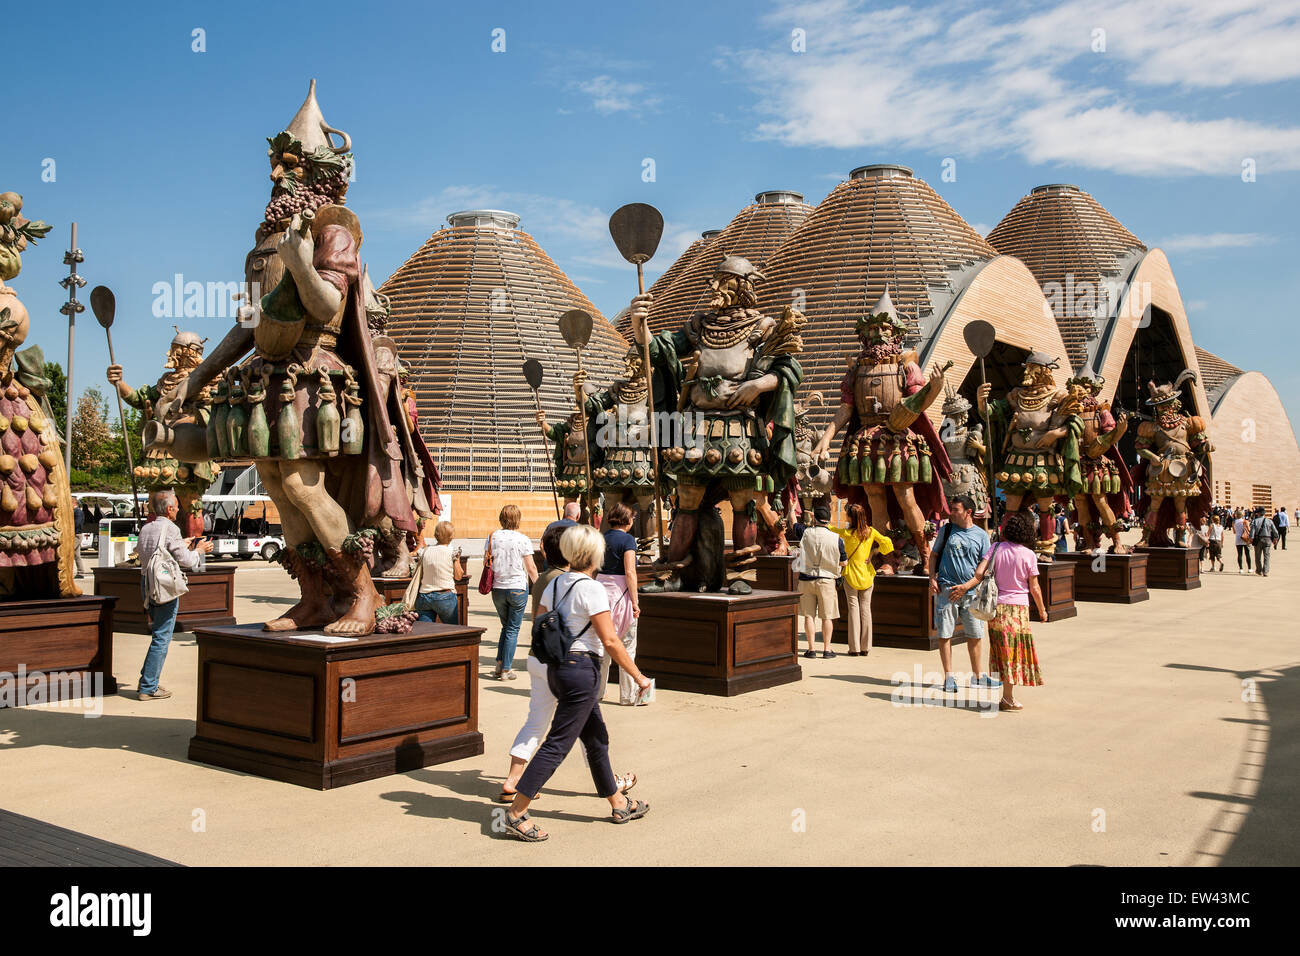 Milan Expo 2015, statues entrance, food, architecture, pavilion, people, structure, Stock Photo